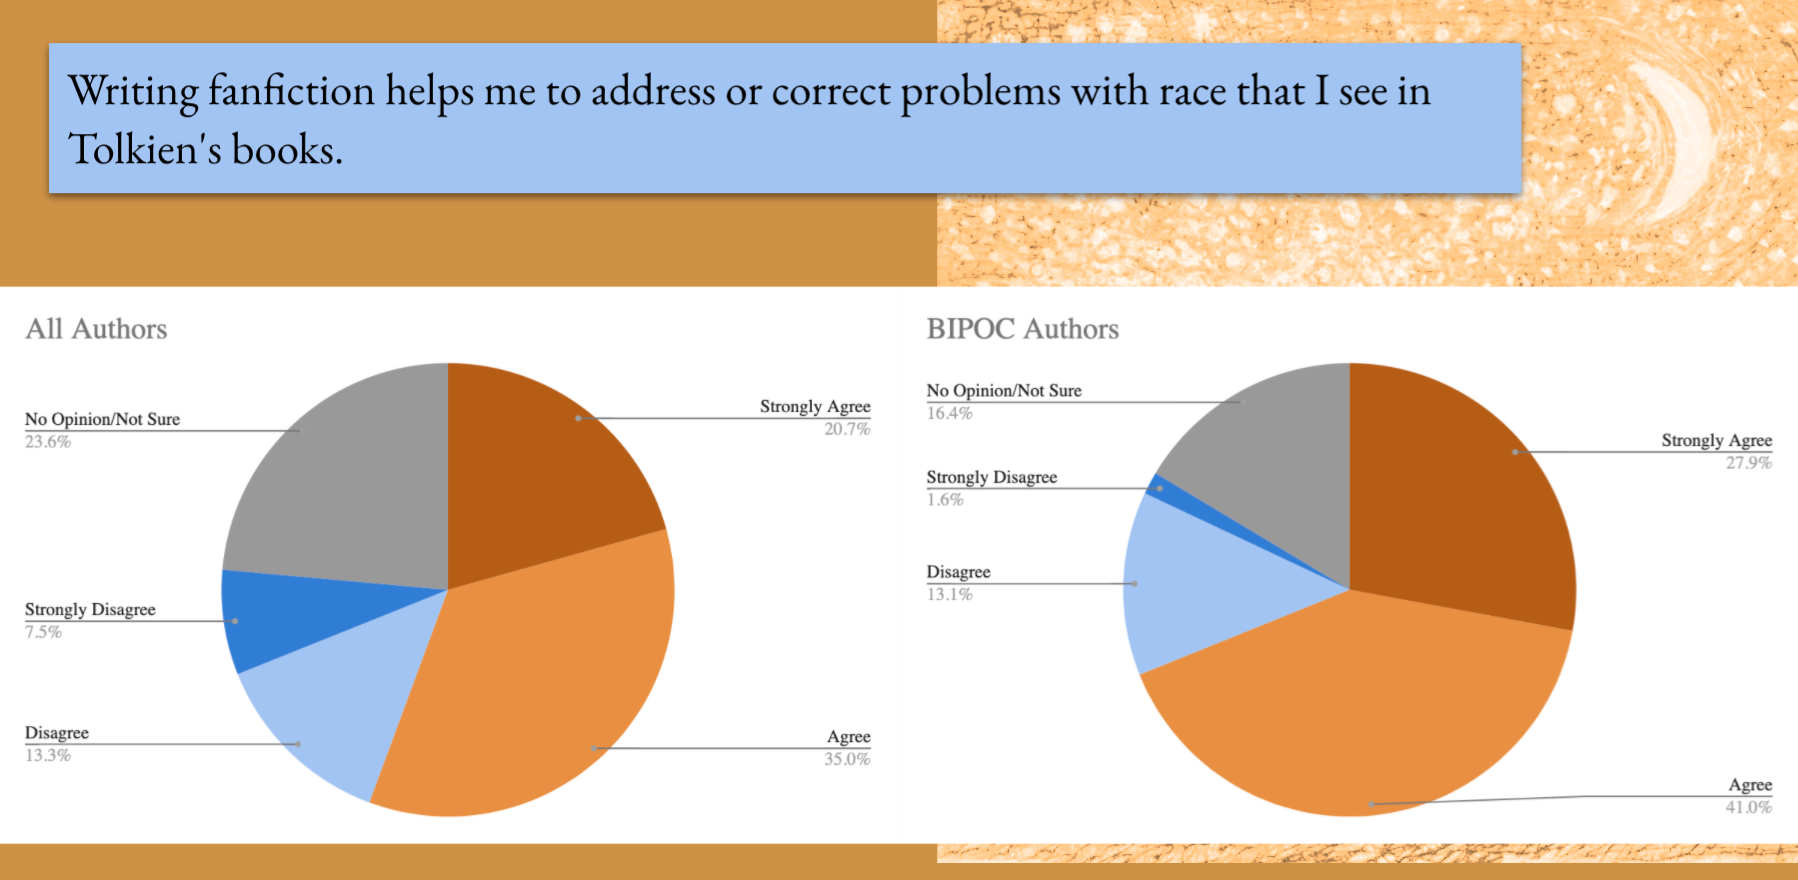 More authors in 2020 agreed that they use fanfic to correct problems with race and BIPOC authors agreed more often